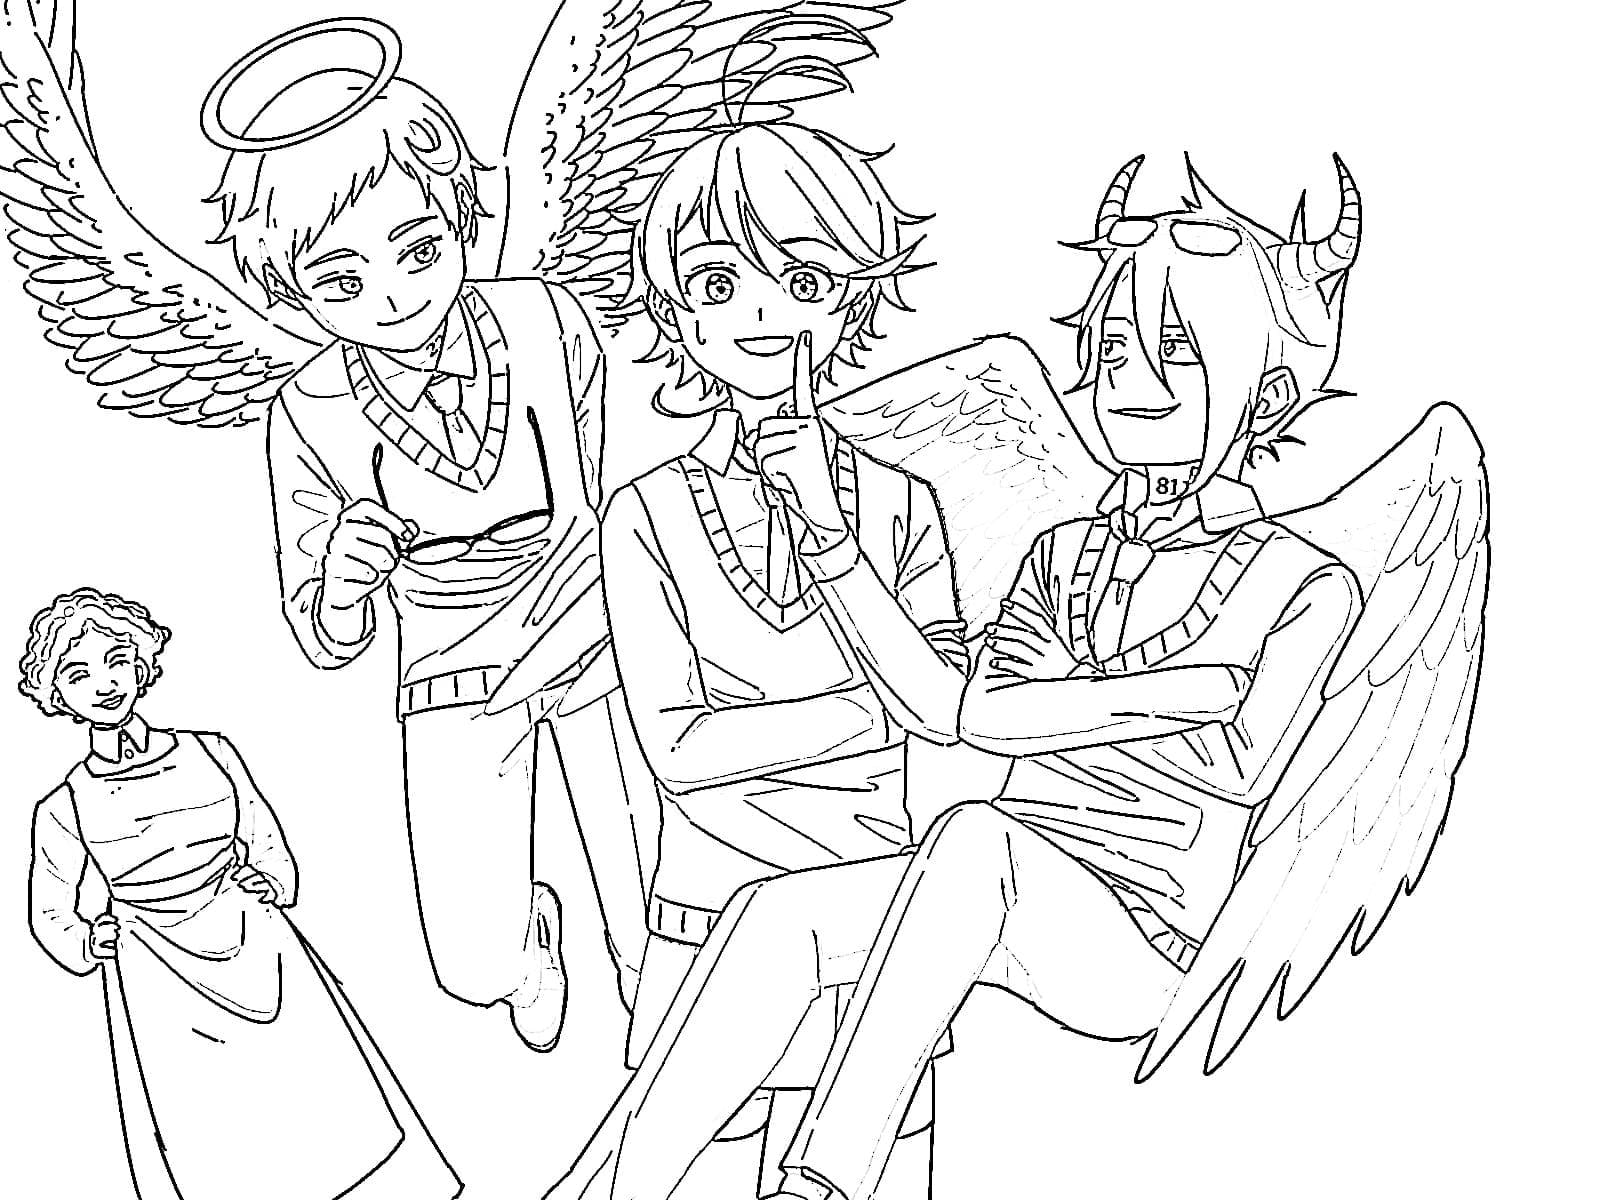 The Promised Neverland to Color Coloring Page